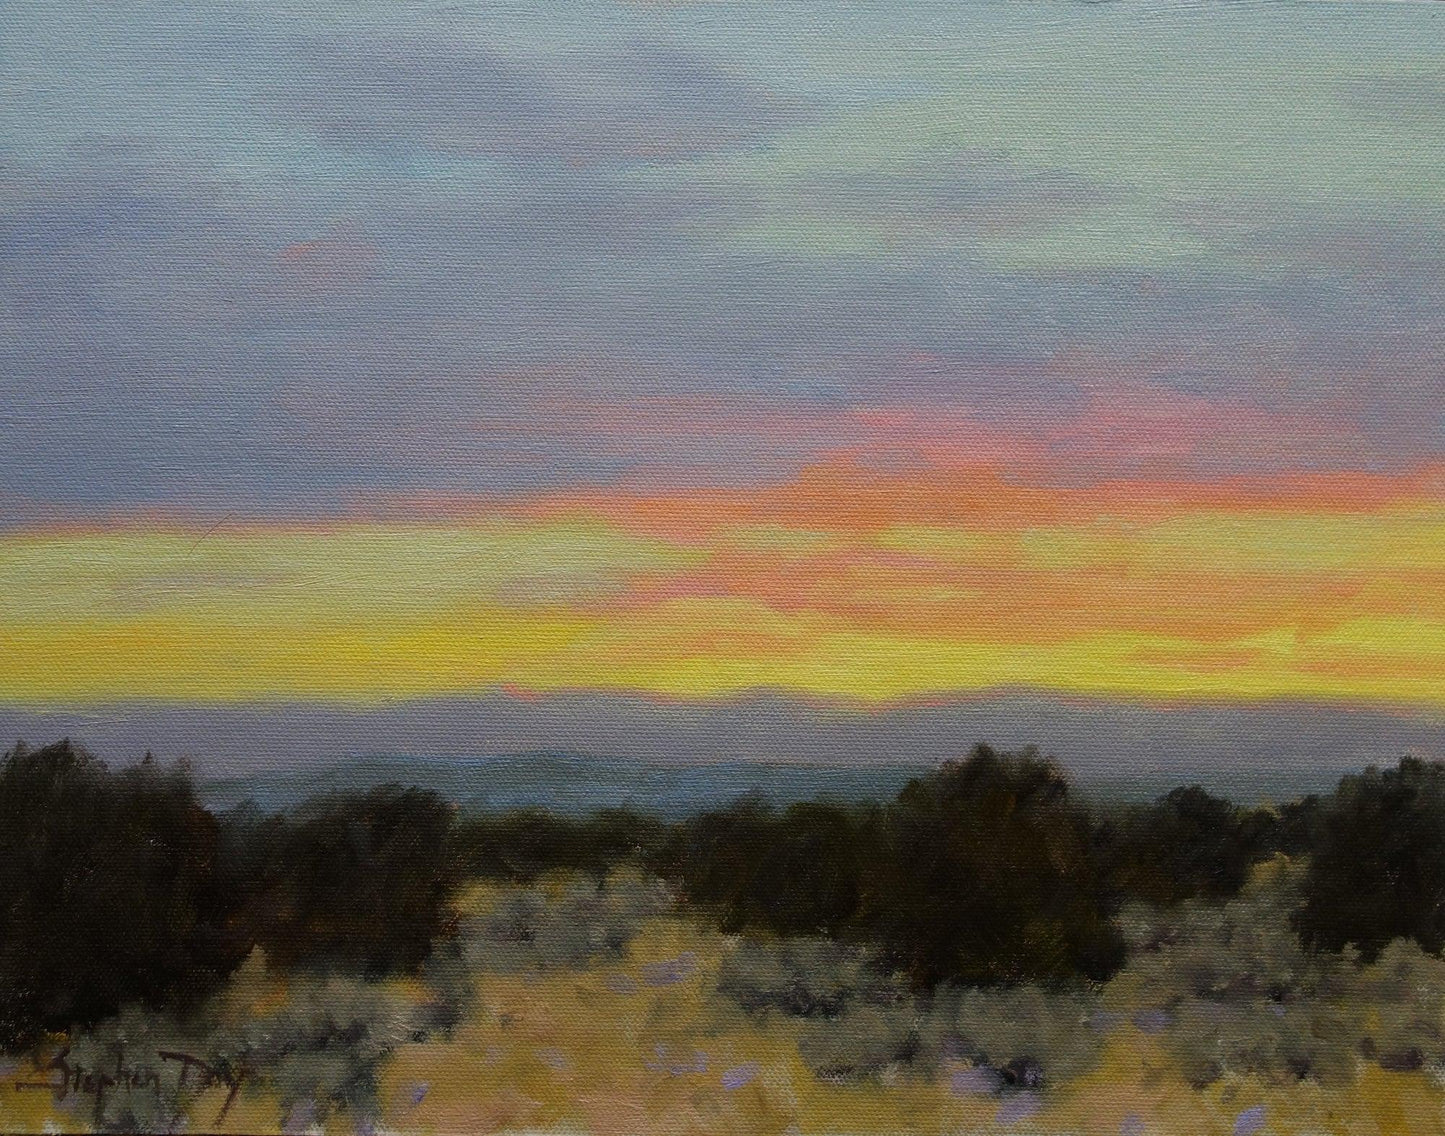 A Moment Of Color-Painting-Stephen Day-Sorrel Sky Gallery